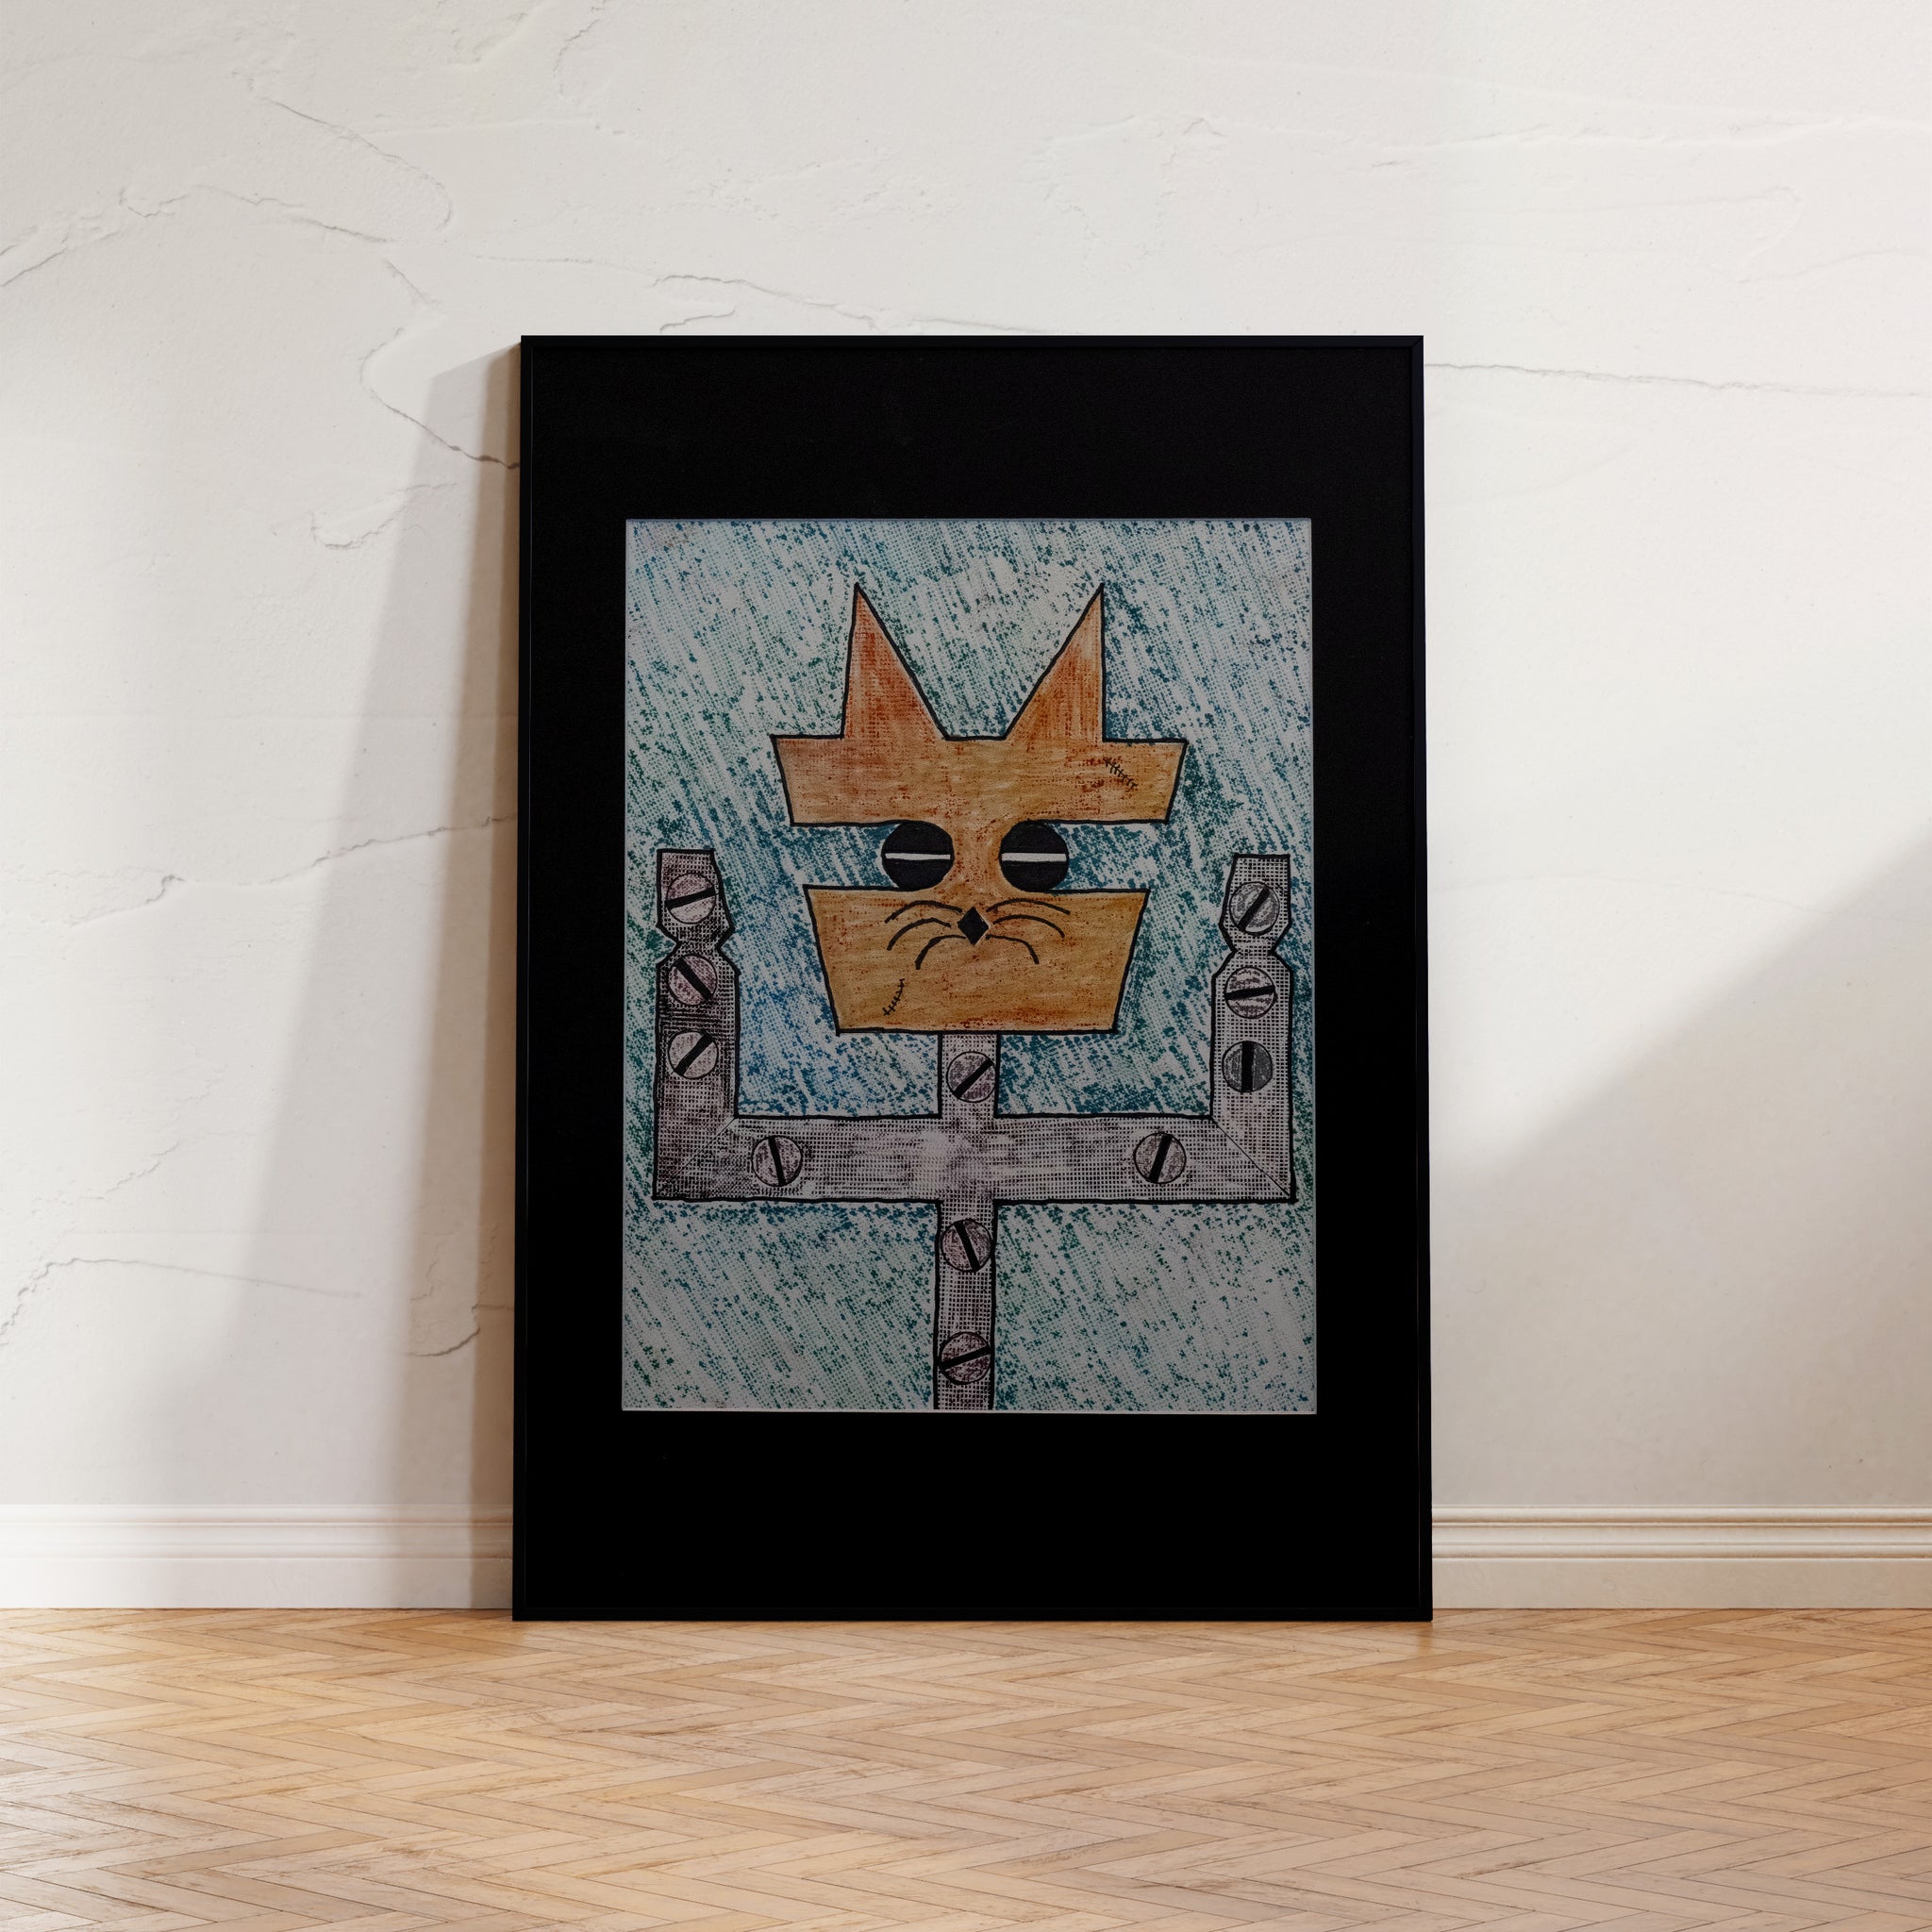 "Mechanically Inclined", A hypermodernist portrait of a cool cat with a blend of organic and mechanical elements.